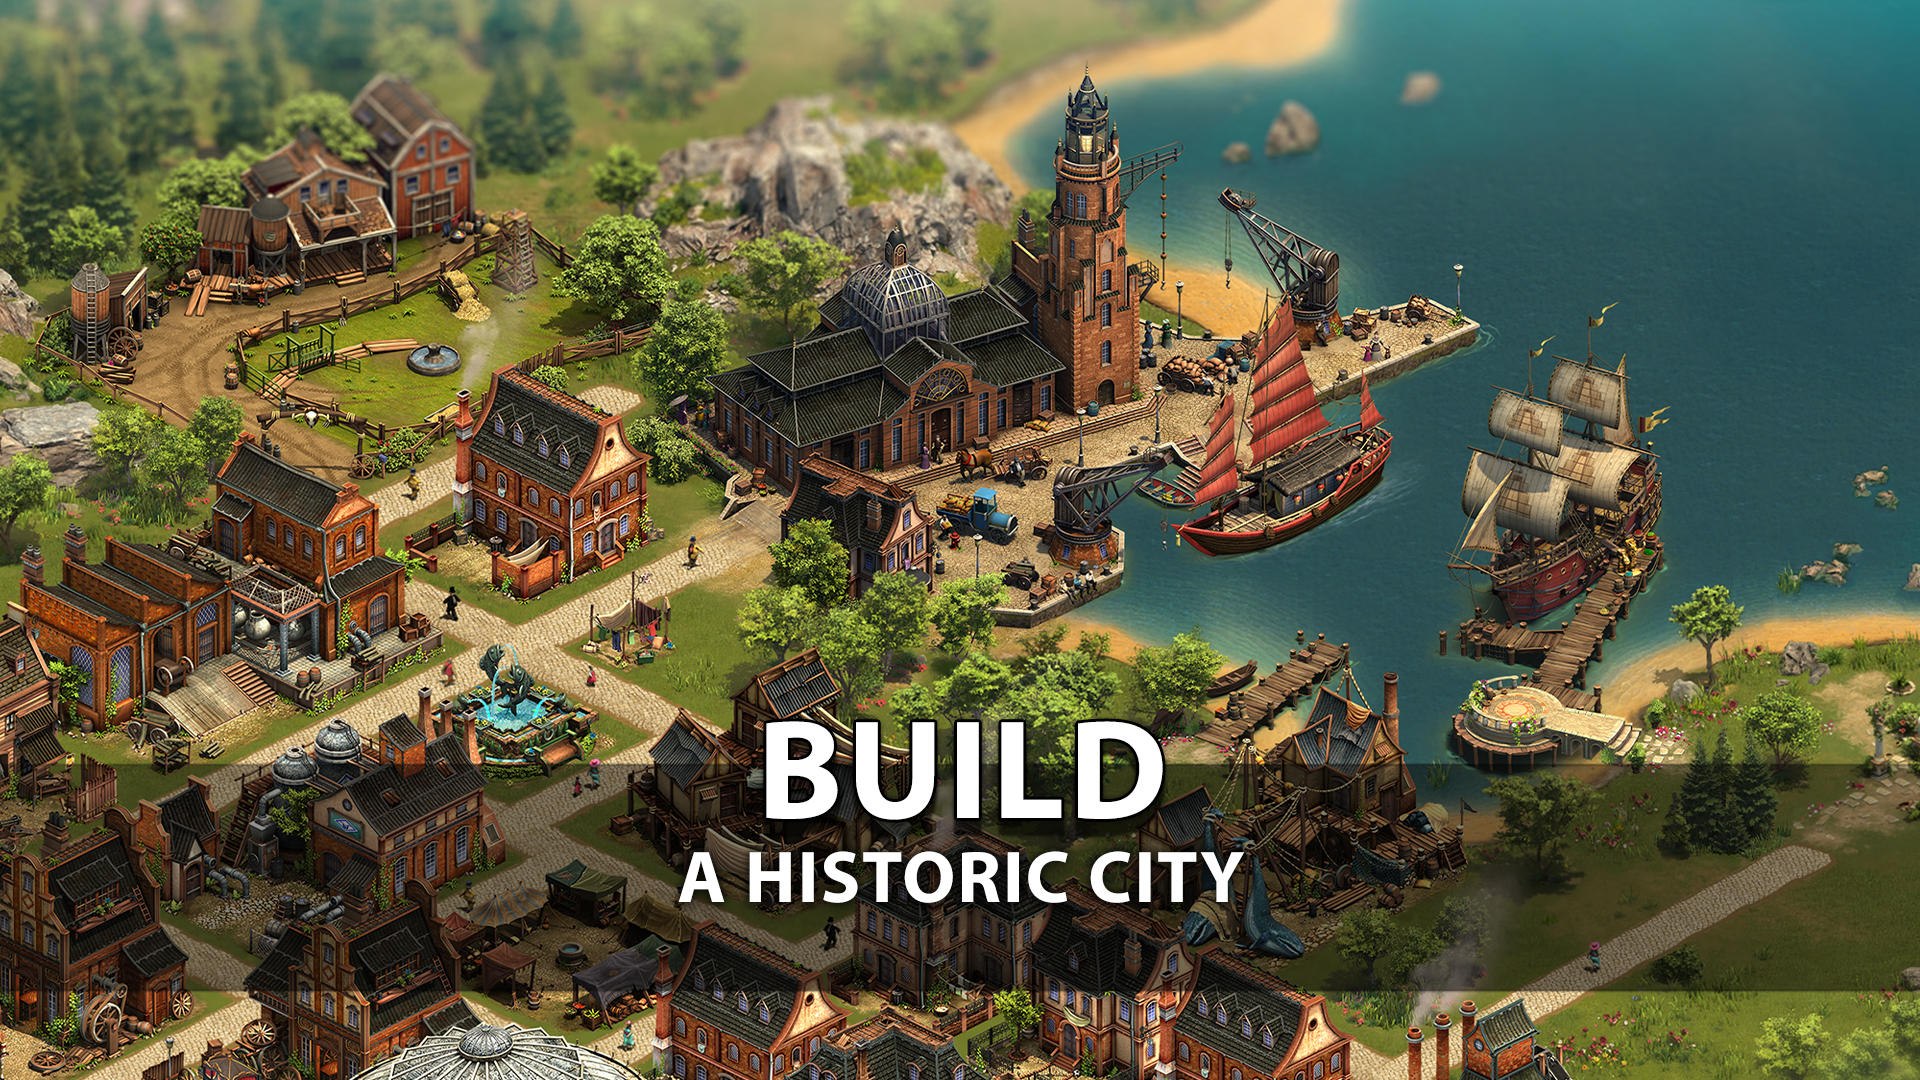 Screenshot 1 of Forge of Empires 1.282.20